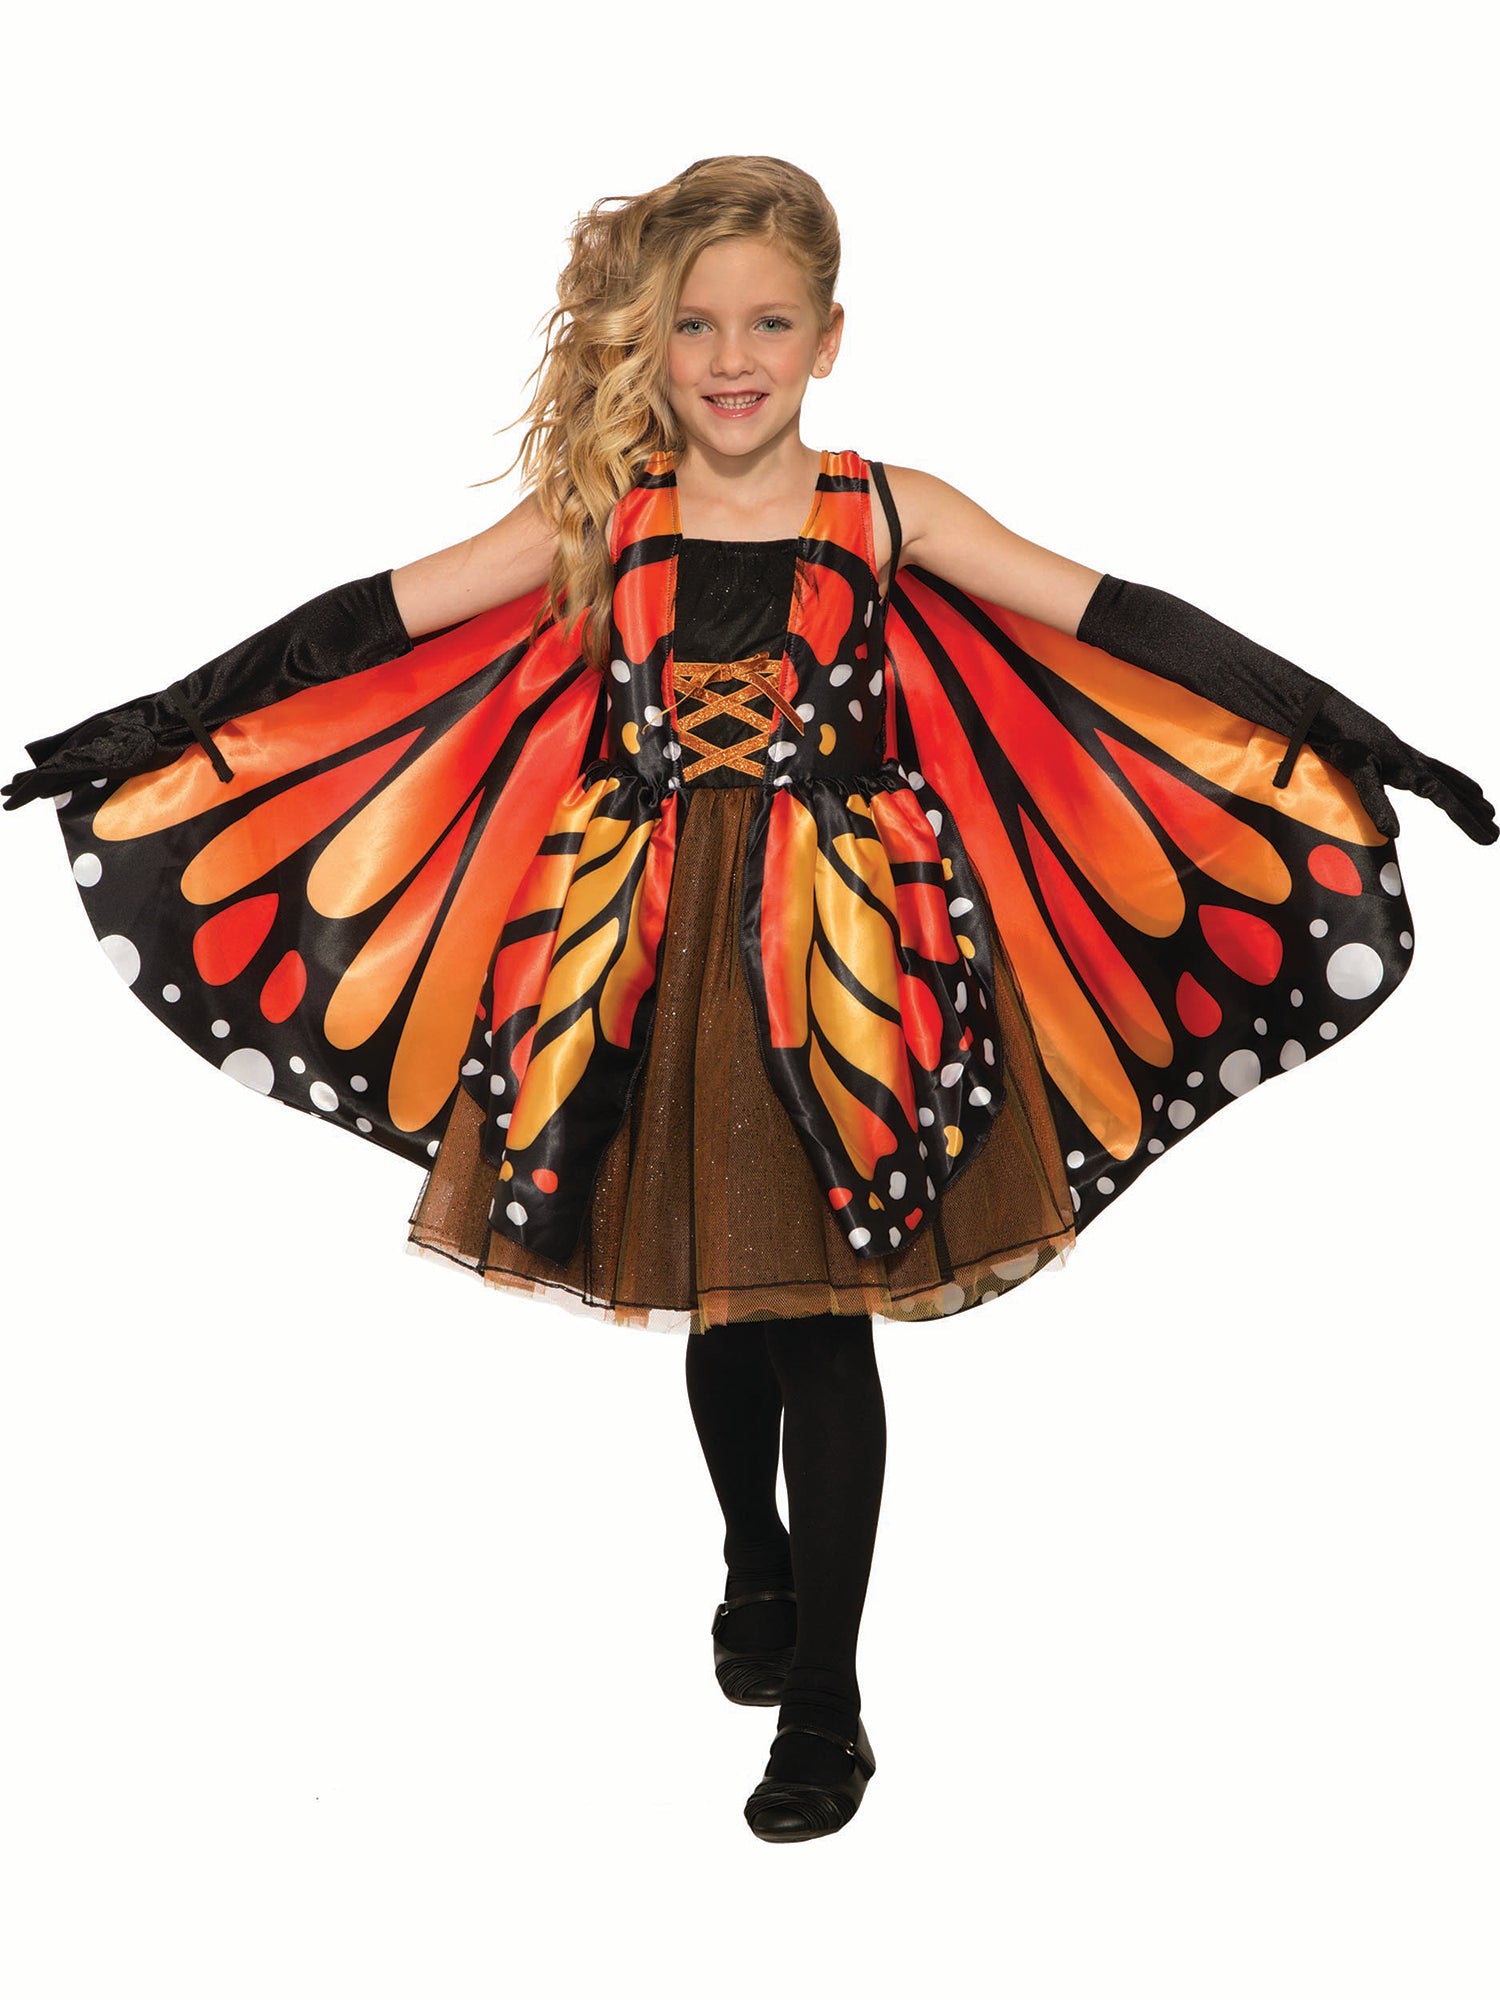 Girls' Beautiful Winged Butterfly Costume - costumes.com